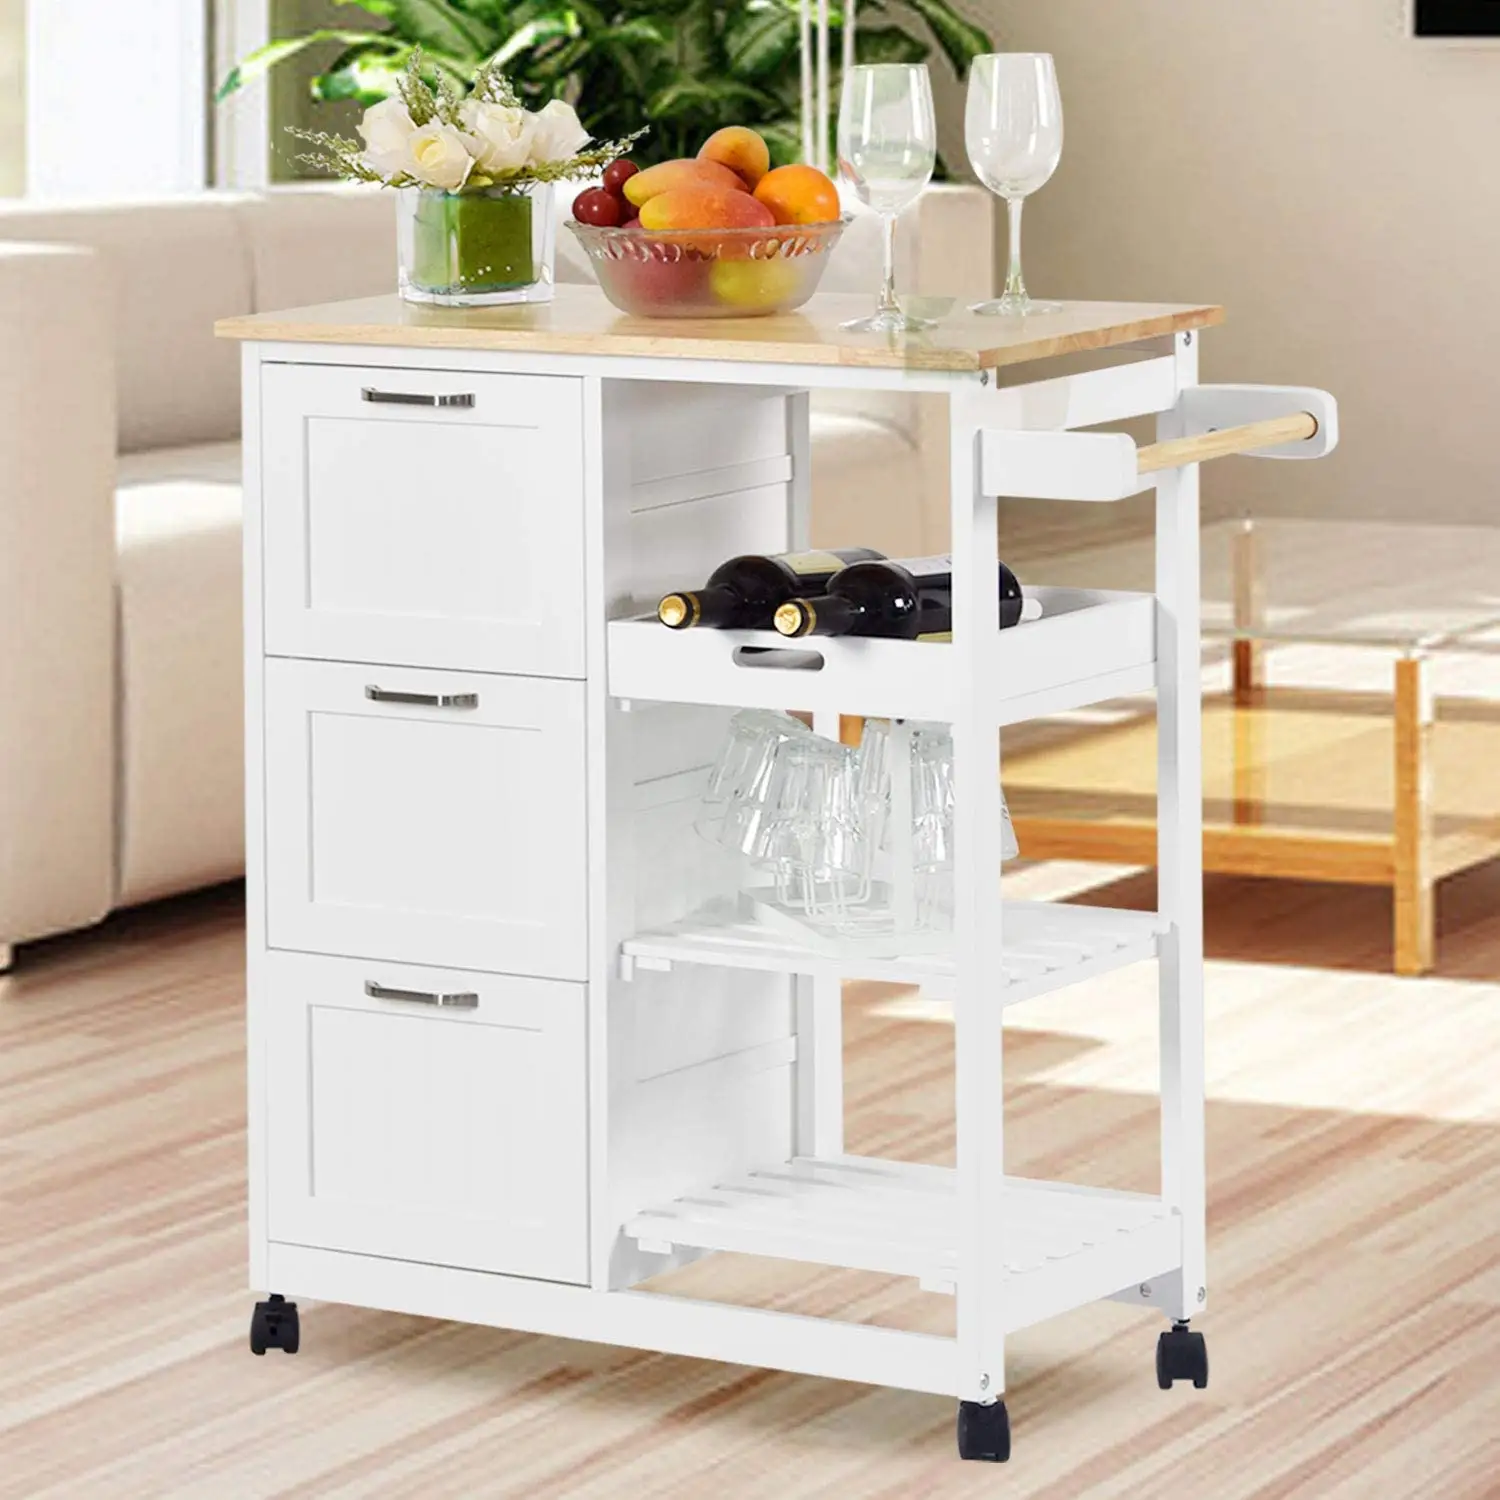 Kitchen Island Cart,Industrial Kitchen Bar&Serving Cart Rolling on Wheels Utility Storage Trolley with 3-Tier Wine Rack Shelves